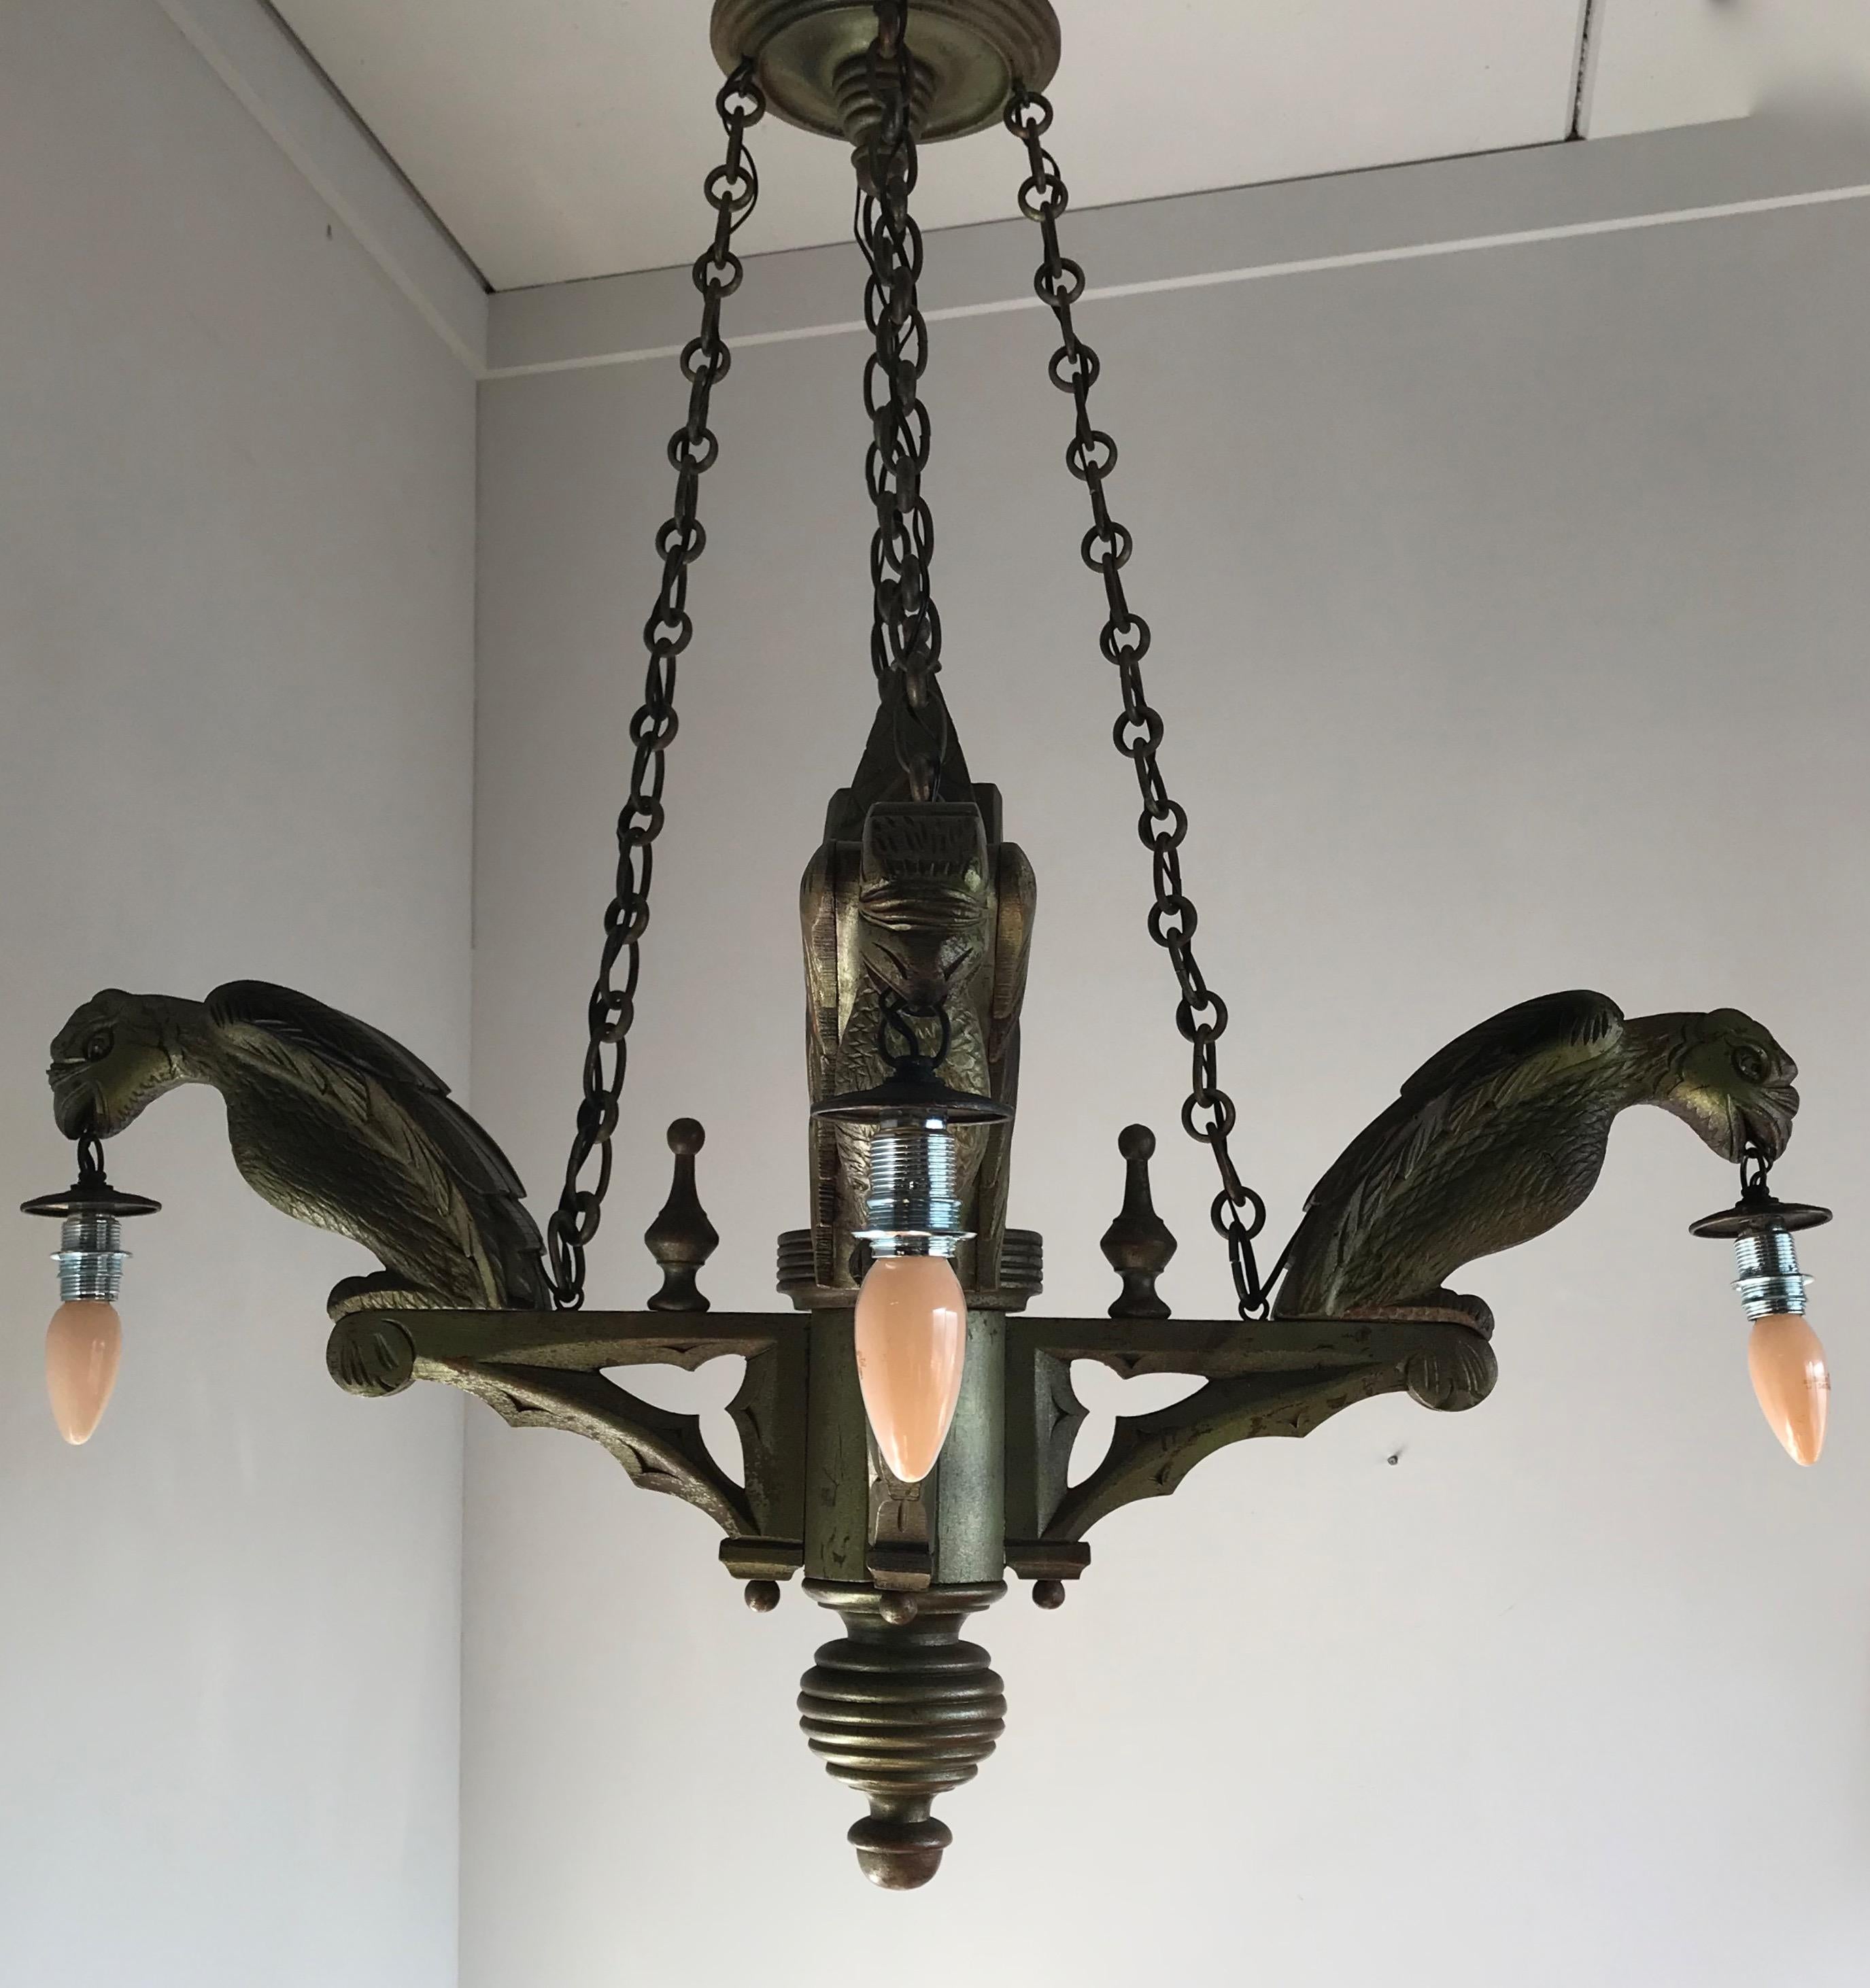 Hand-Carved Rare Hand Carved Wooden Gothic Revival Art Chandelier with Gargoyle Sculptures For Sale